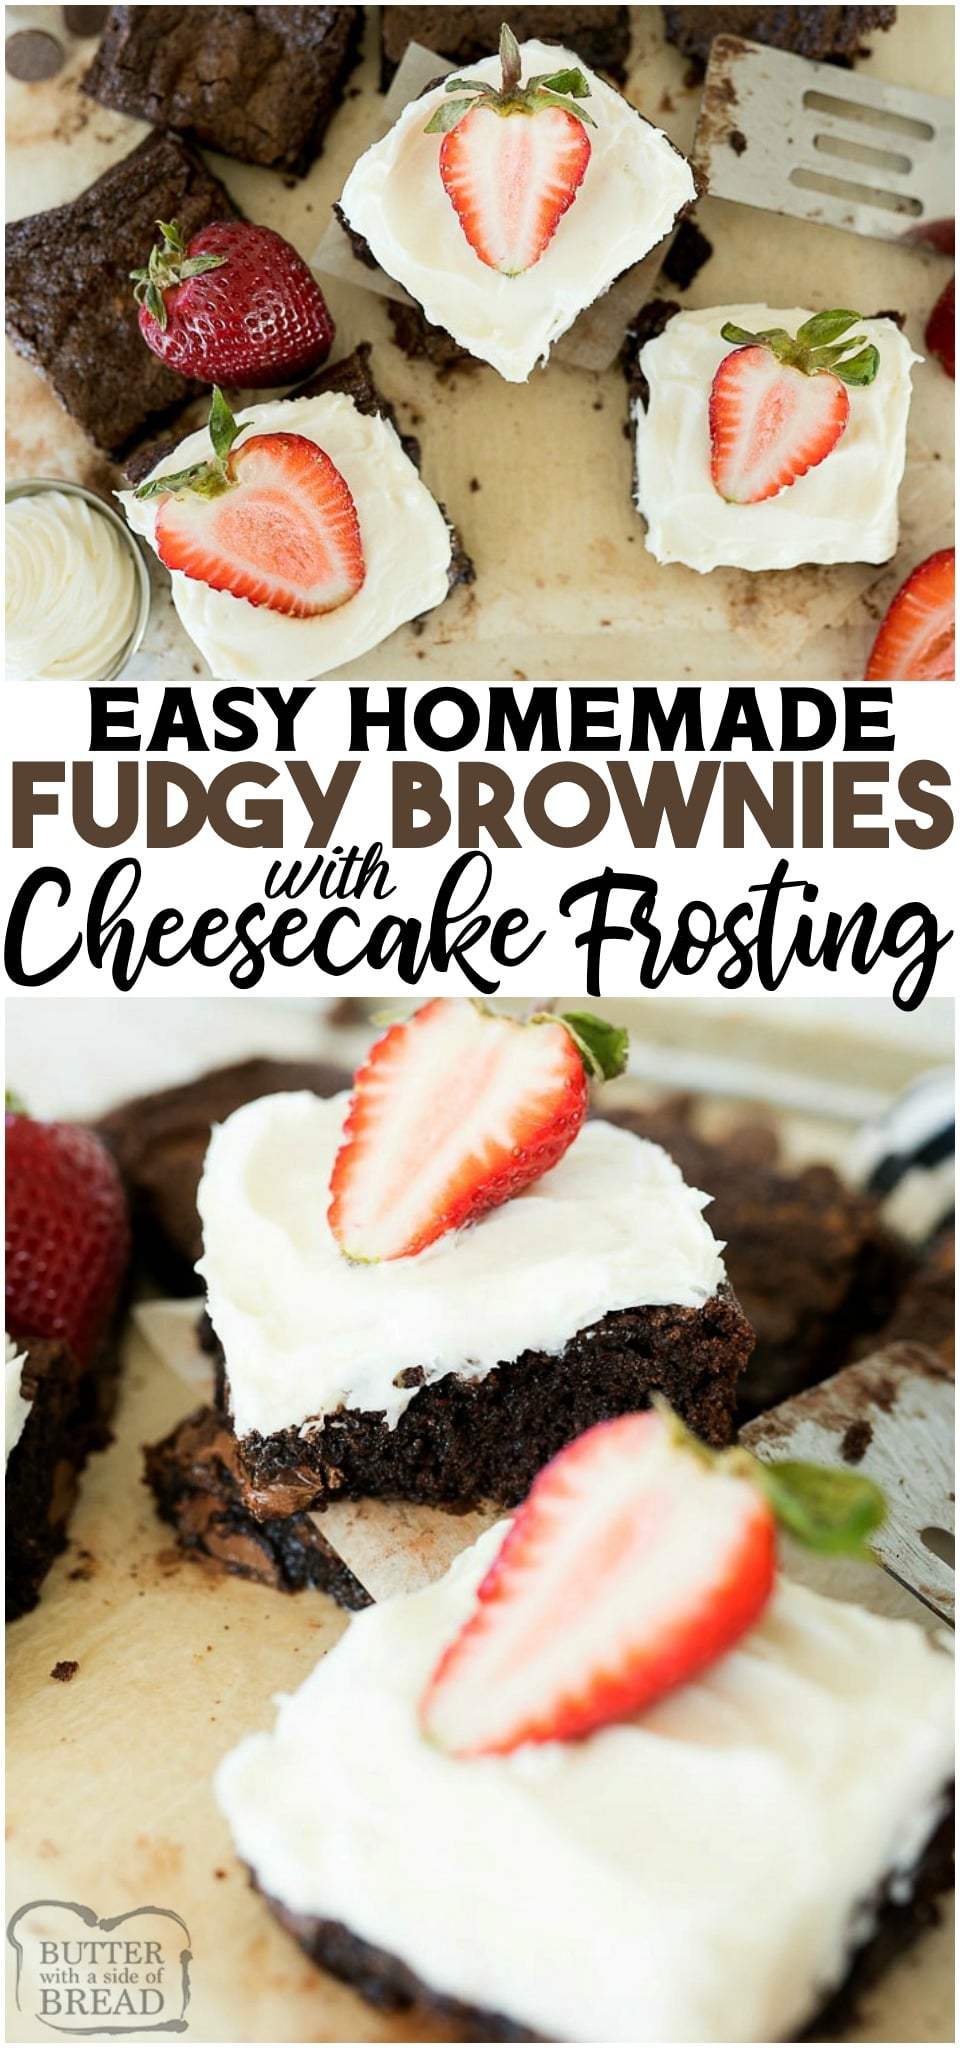 Brownies with a Cheesecake Frosting topped with fresh strawberries for a rich and decadent dessert! Fudgy homemade brownies topped with creamy Cheesecake frosting and fresh strawberries. #brownies #cheesecake #frosting #homemade #baking #dessert #recipe from BUTTER WITH A SIDE OF BREAD